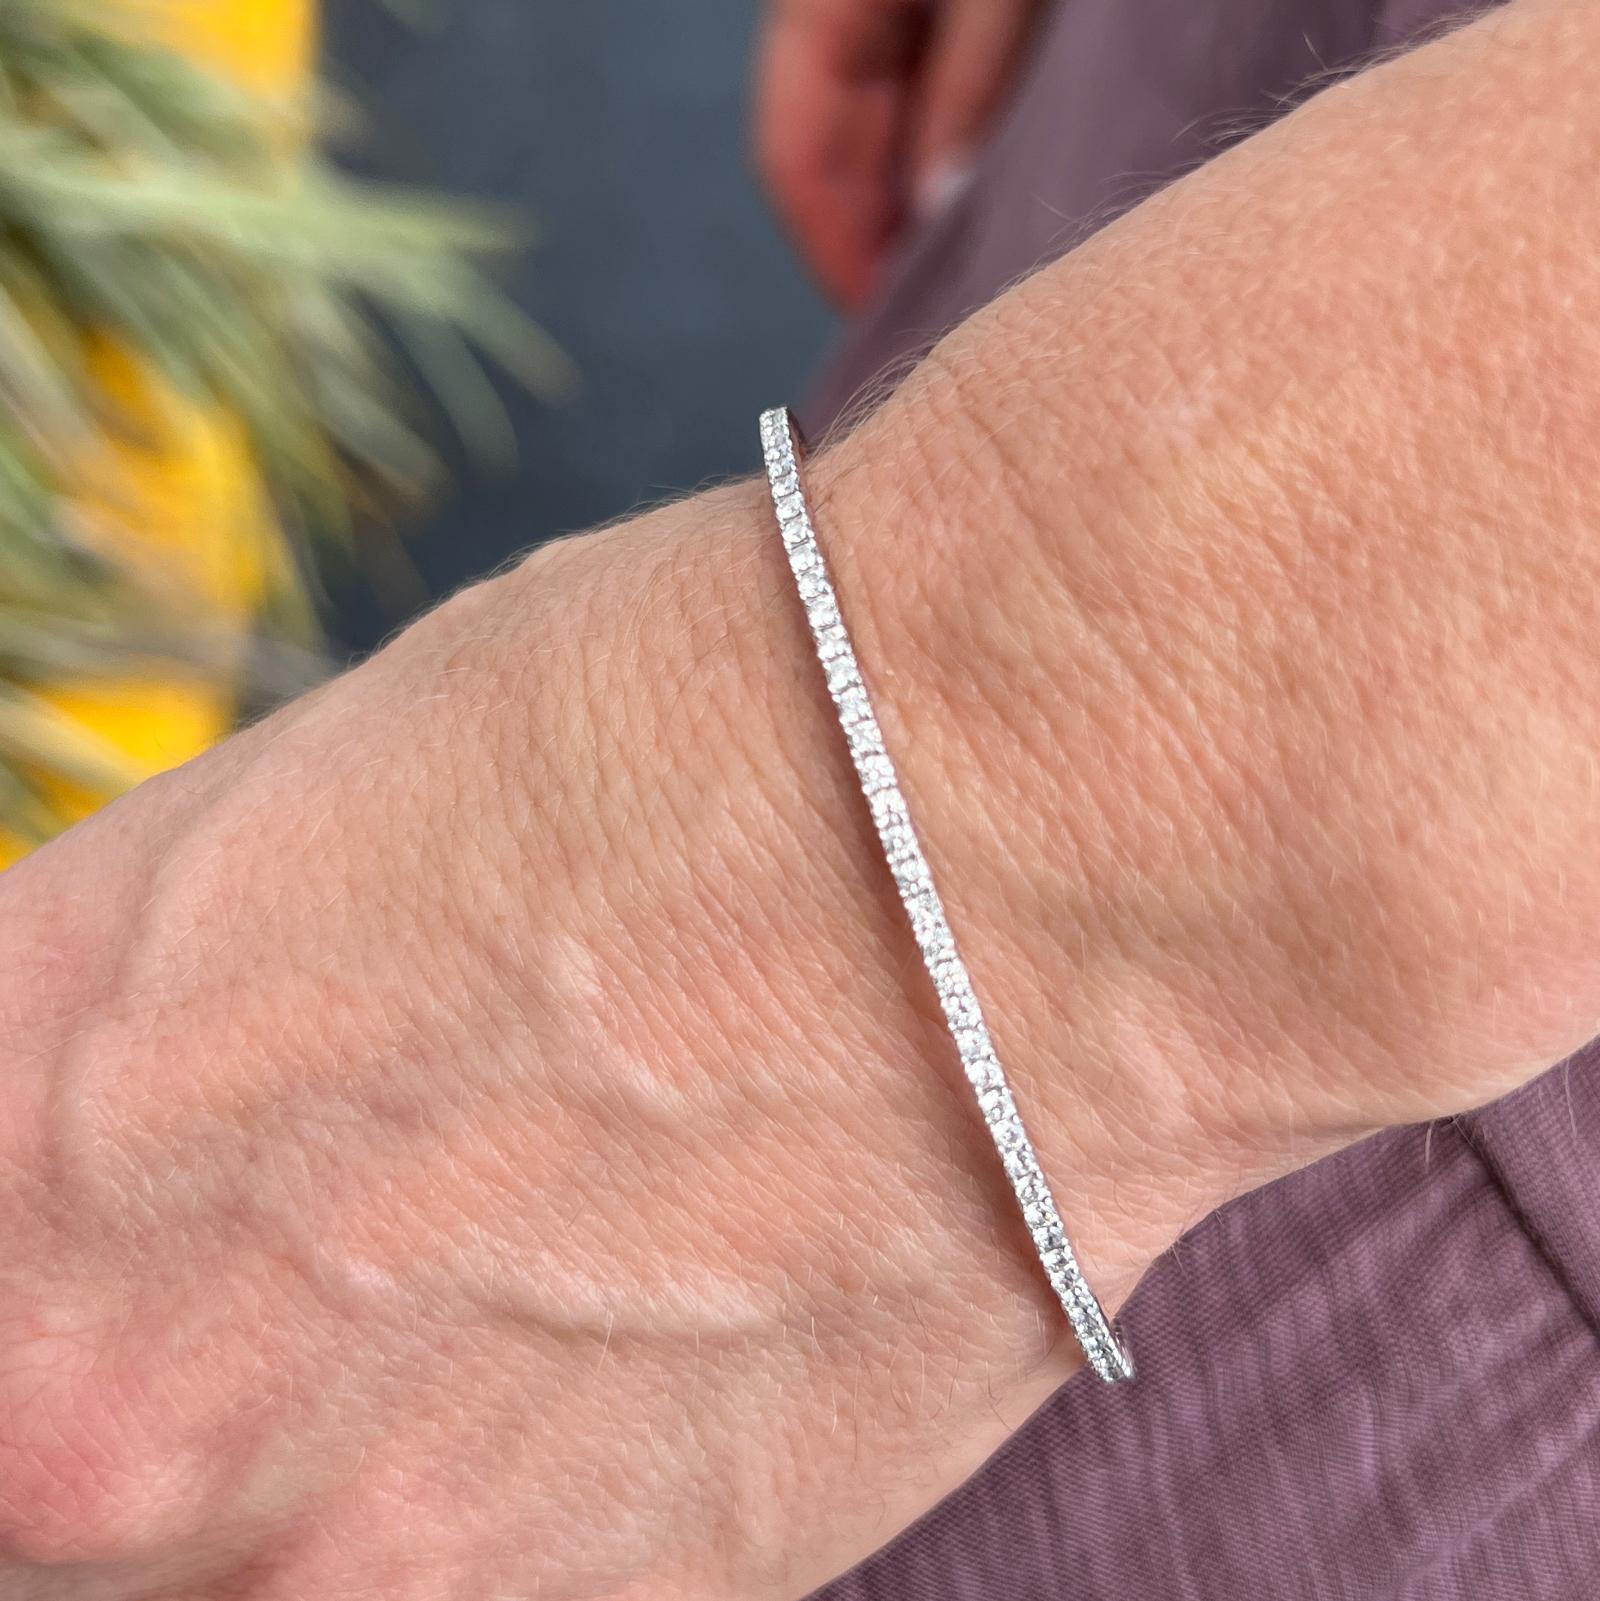 Modern stackable diamond bangle crafted in 18 karat white gold. The flexible bangle features 90 round brilliant cut diamonds weighing 1.62 carat total weight and graded F-G color and SI1 clarity. The bracelet measures 2mm in width and fits up to a 7